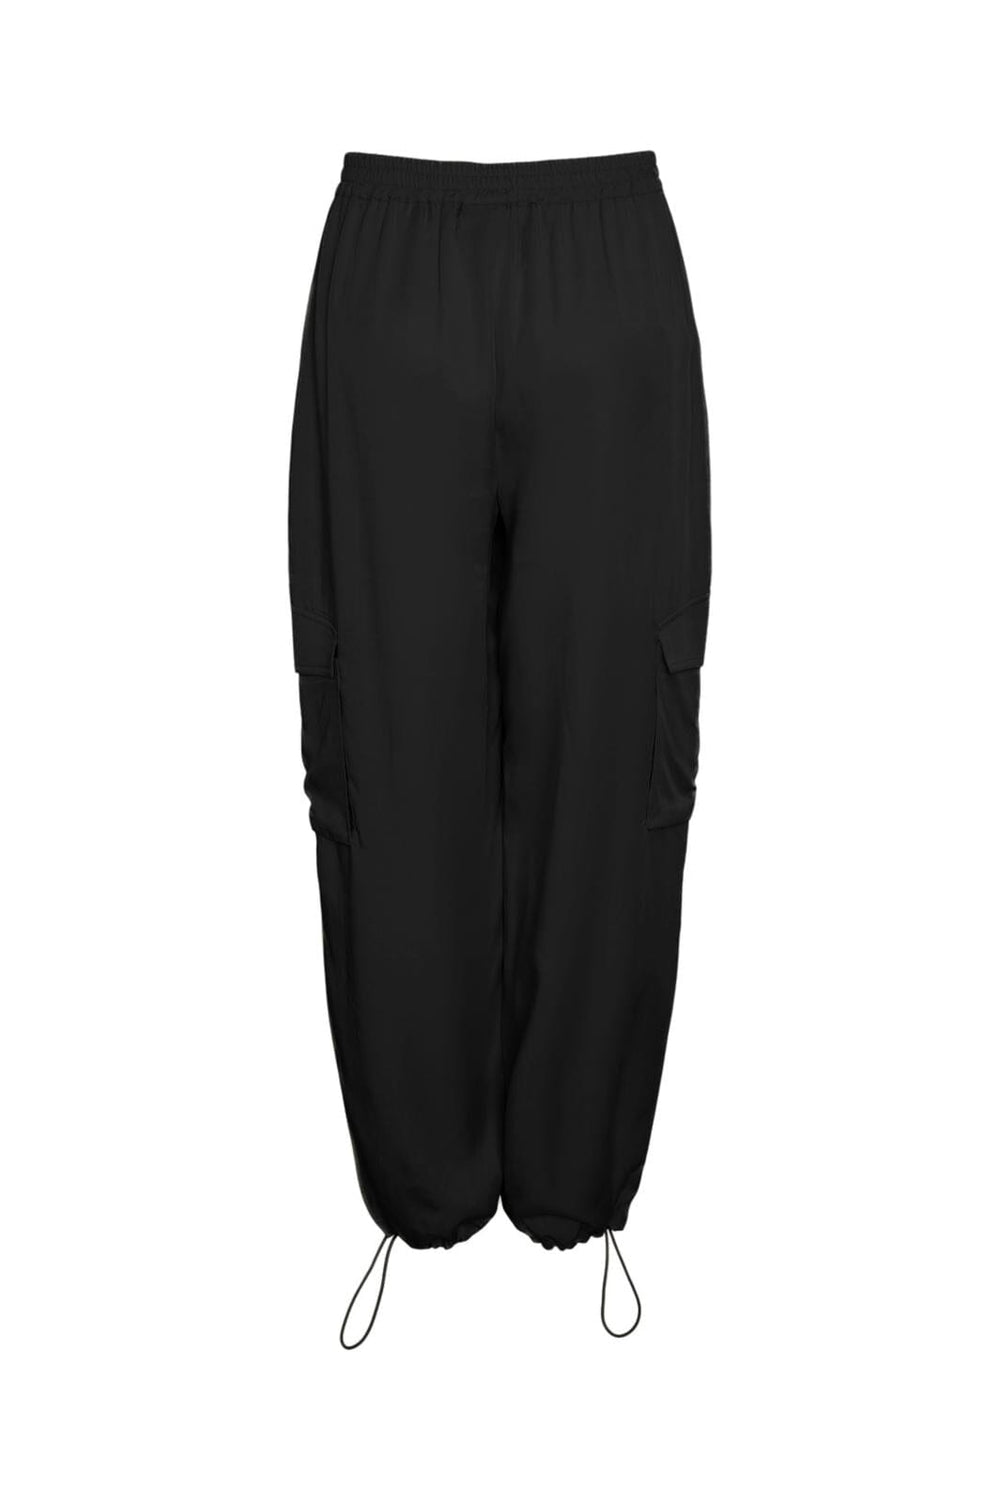 Y.A.S - Yasbamboo Hmw Pant - 4437671 Black